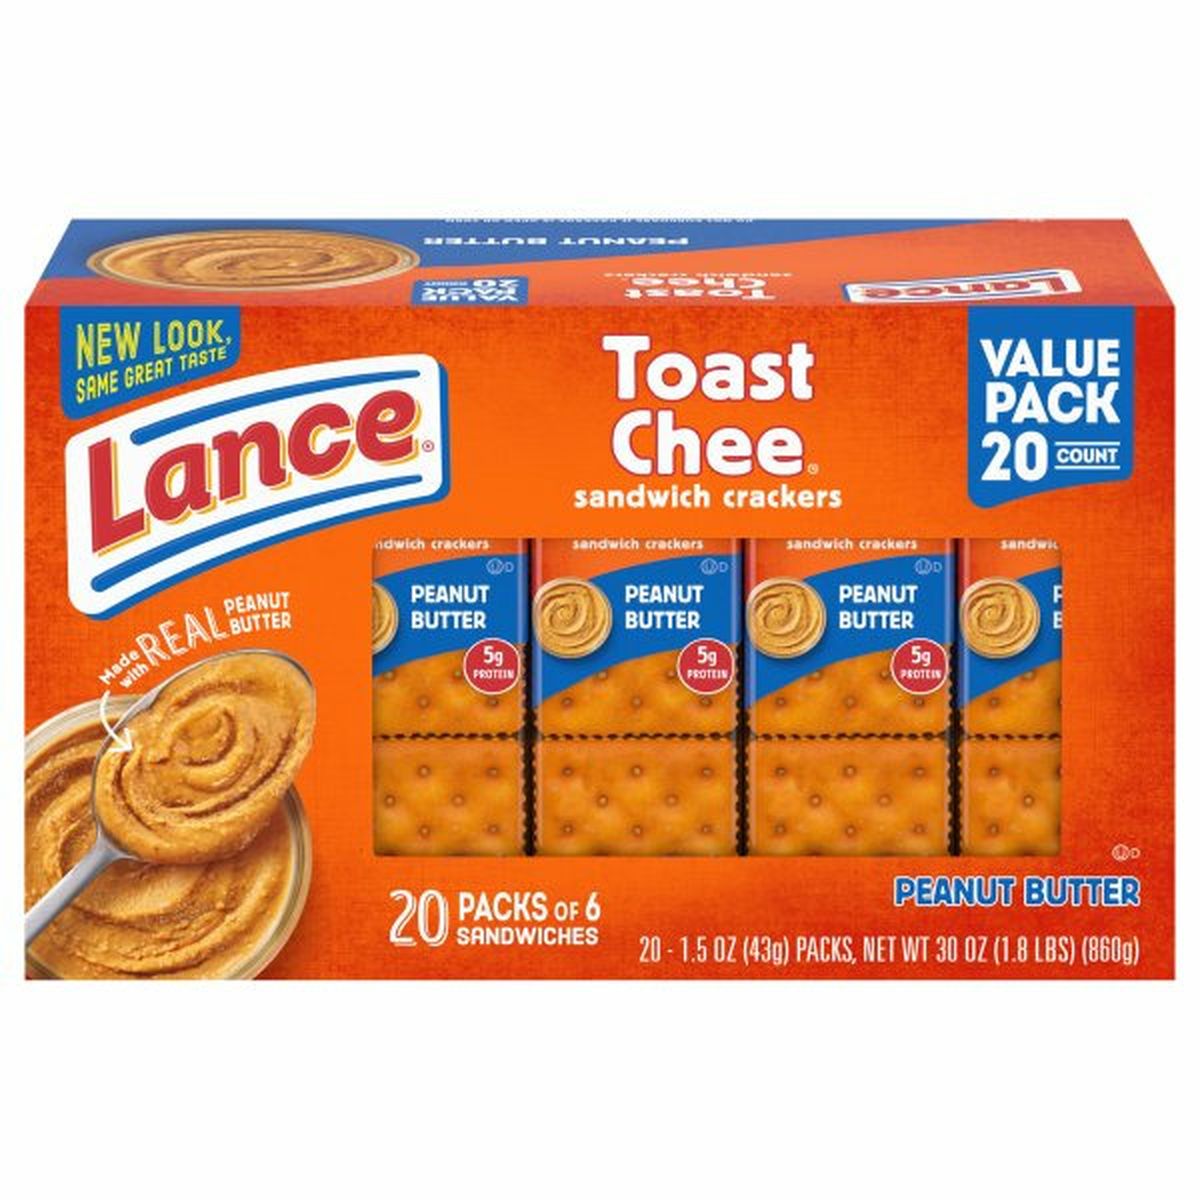 Calories in Lances Toast Chee Sandwich Crackers, Peanut Butter, Value Pack